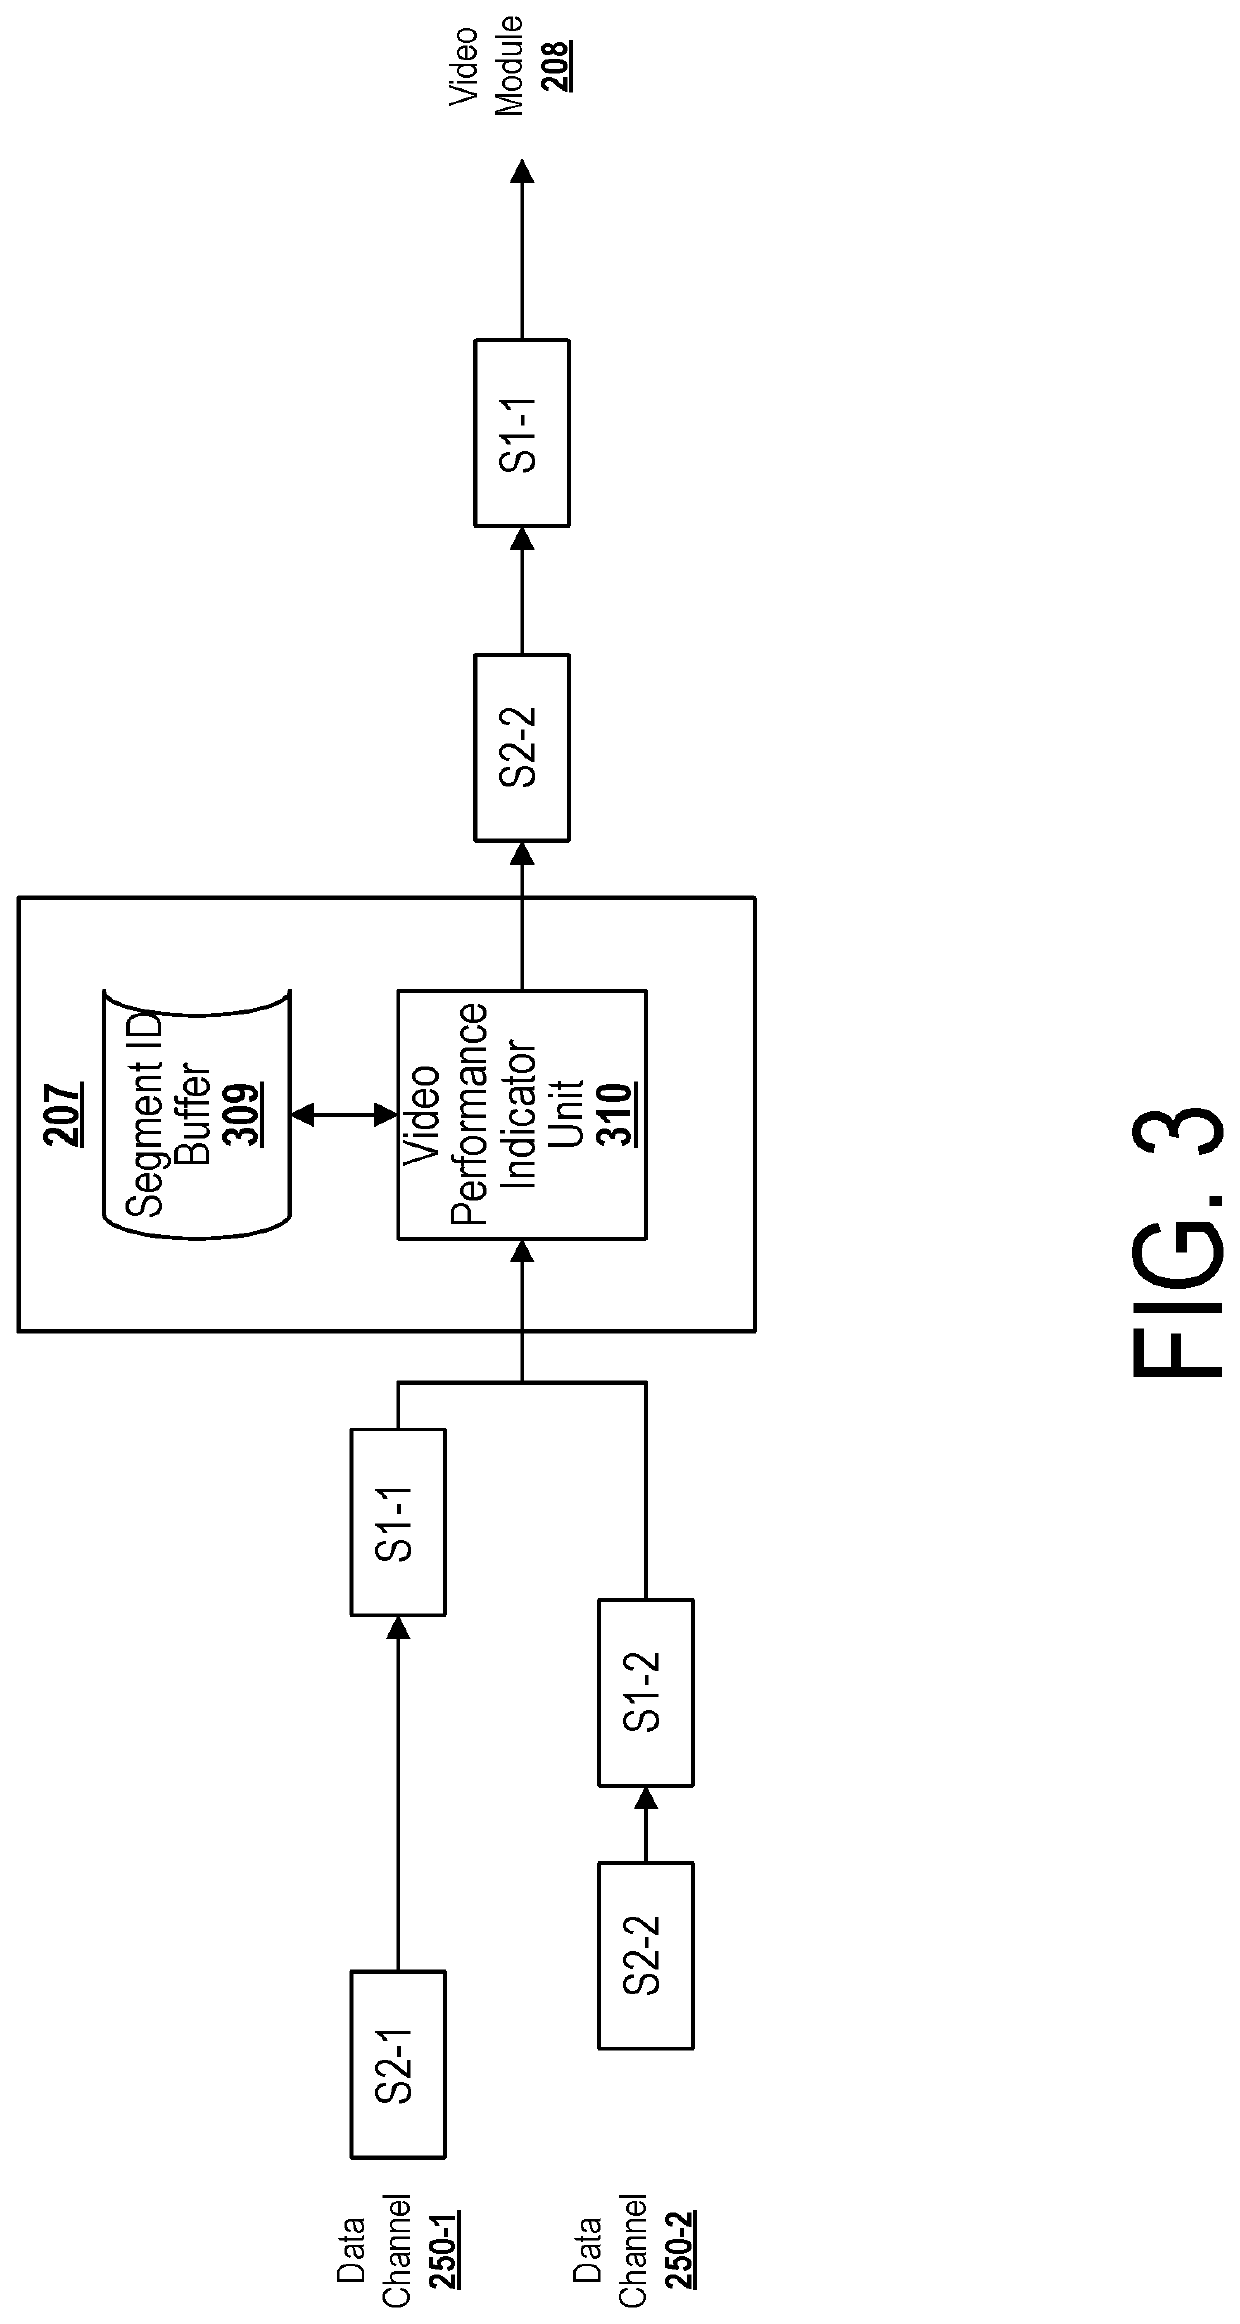 Low latency wireless communication system for teleoperated vehicle environments